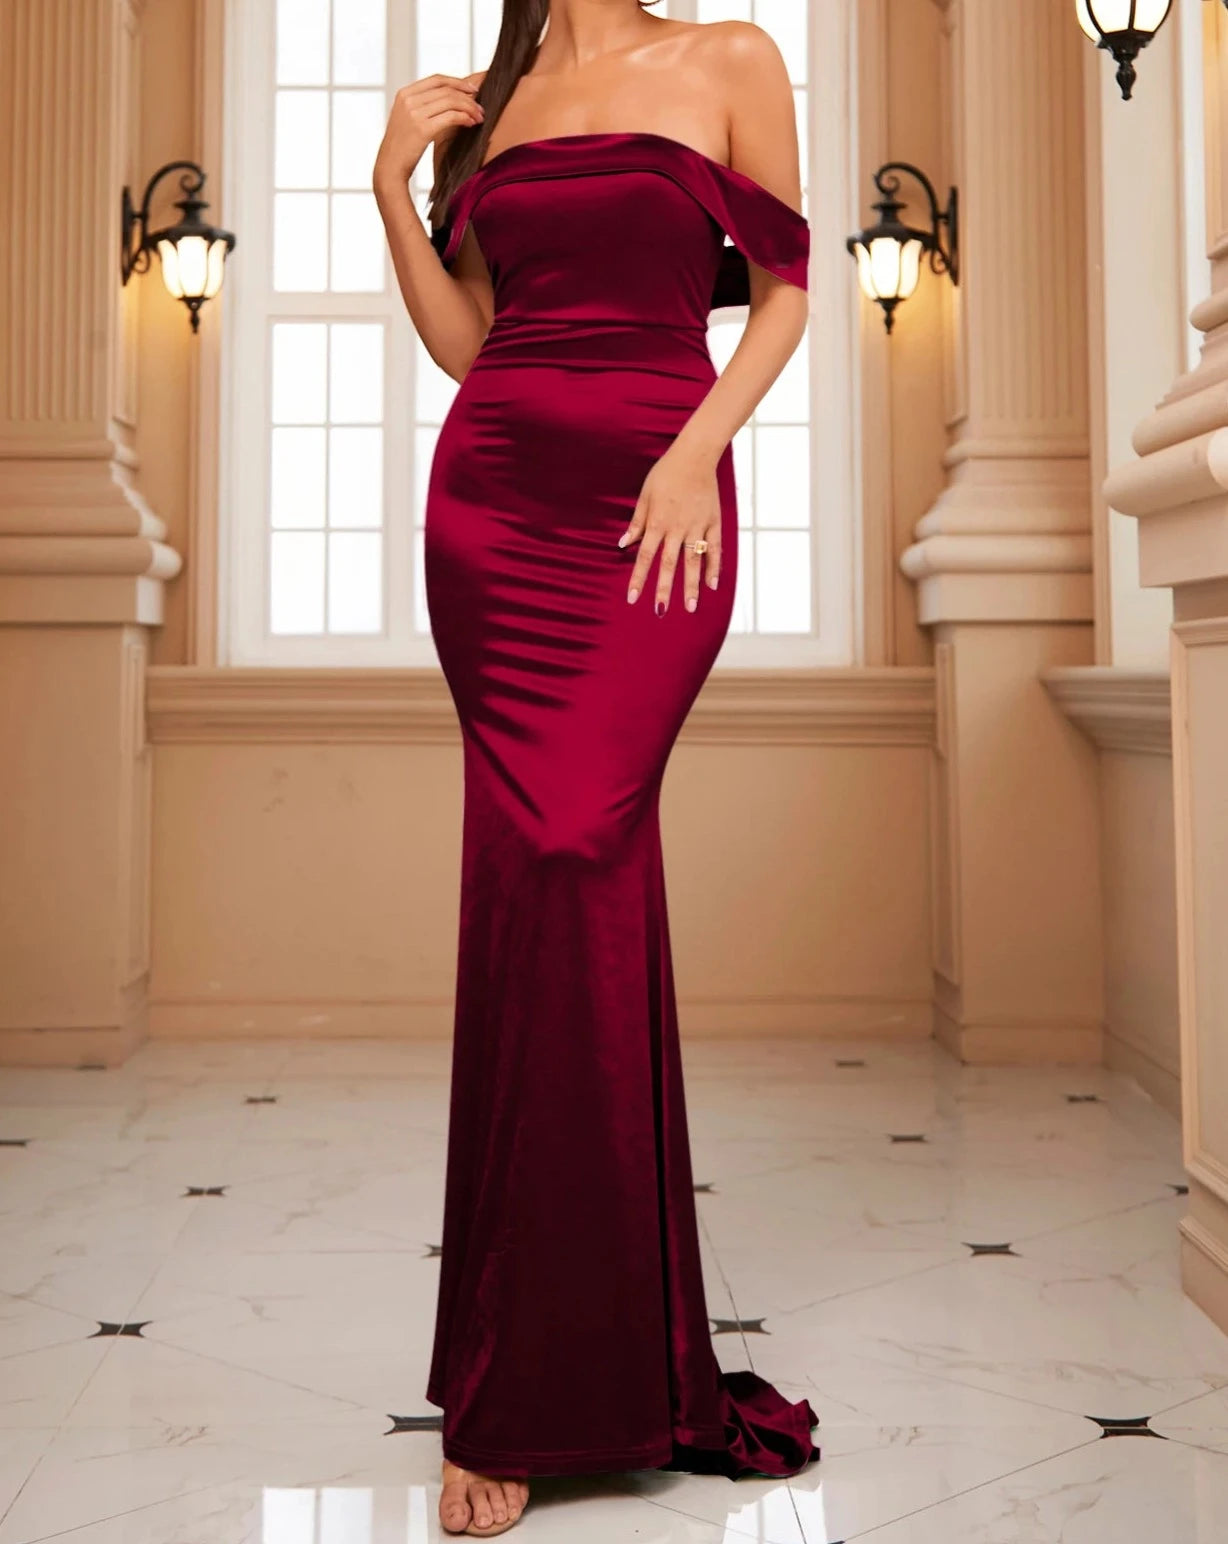 Women's off the shoulder red gown